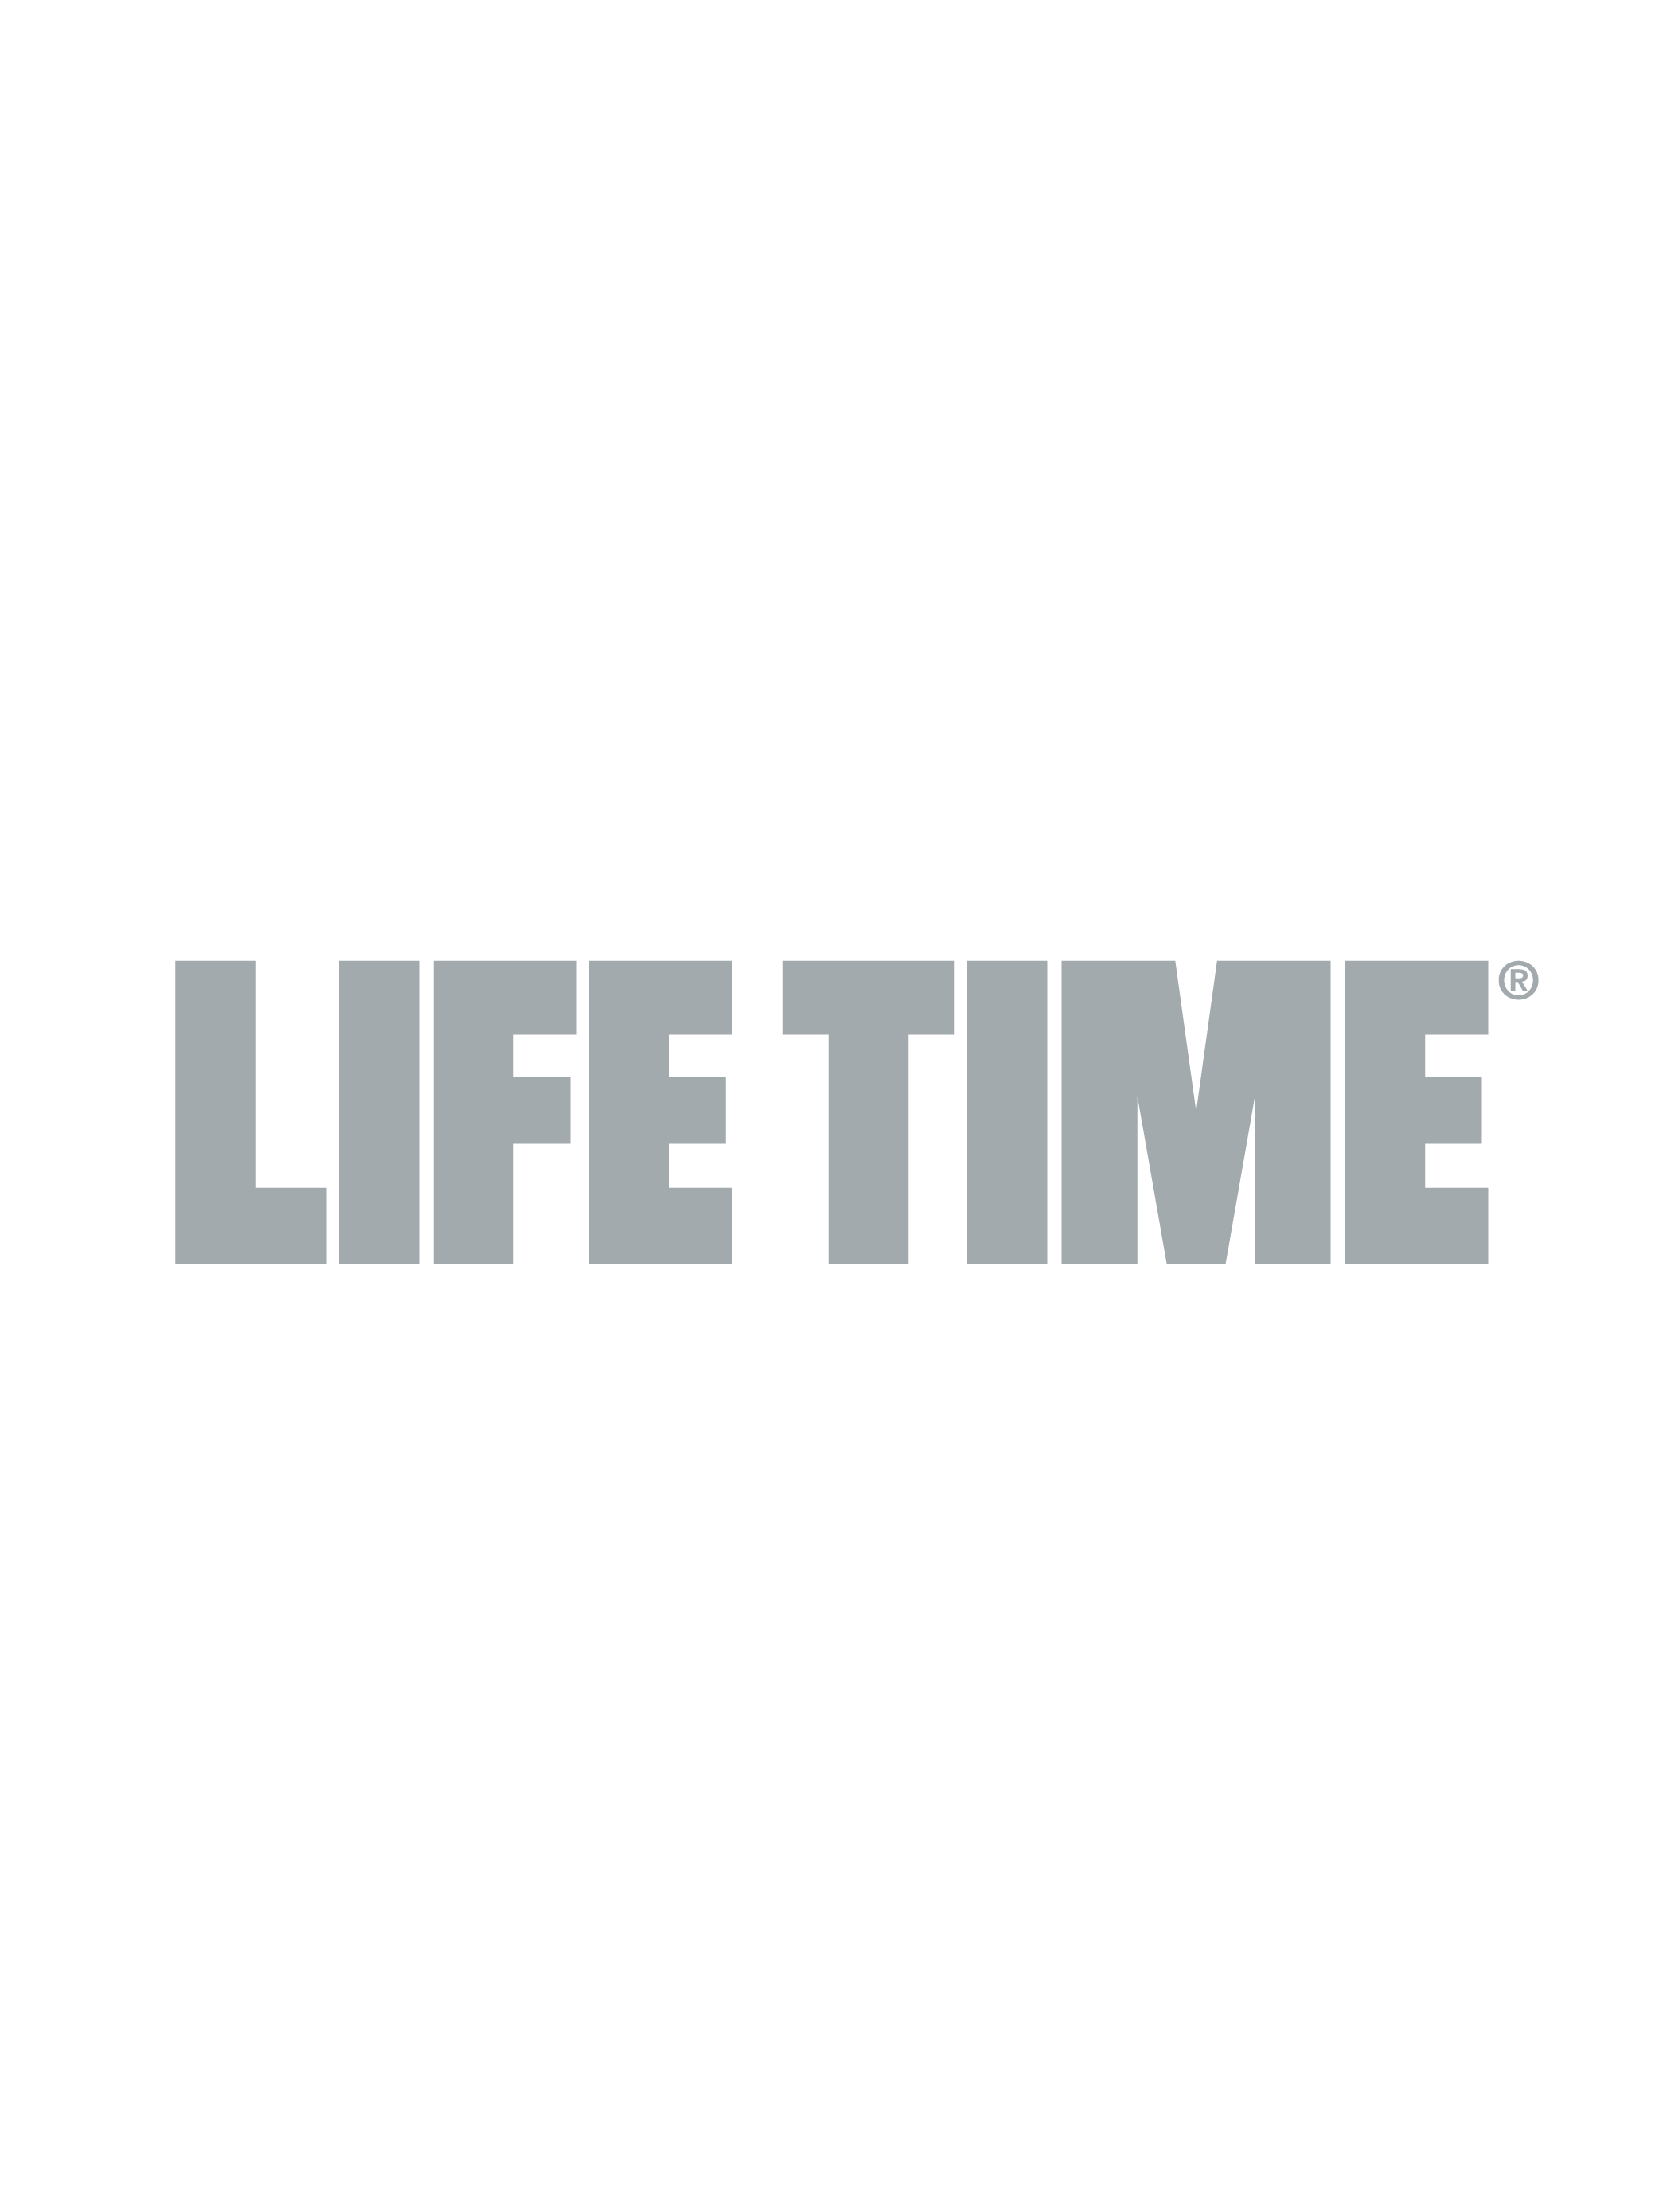 Life Time Fitness - Wikipedia